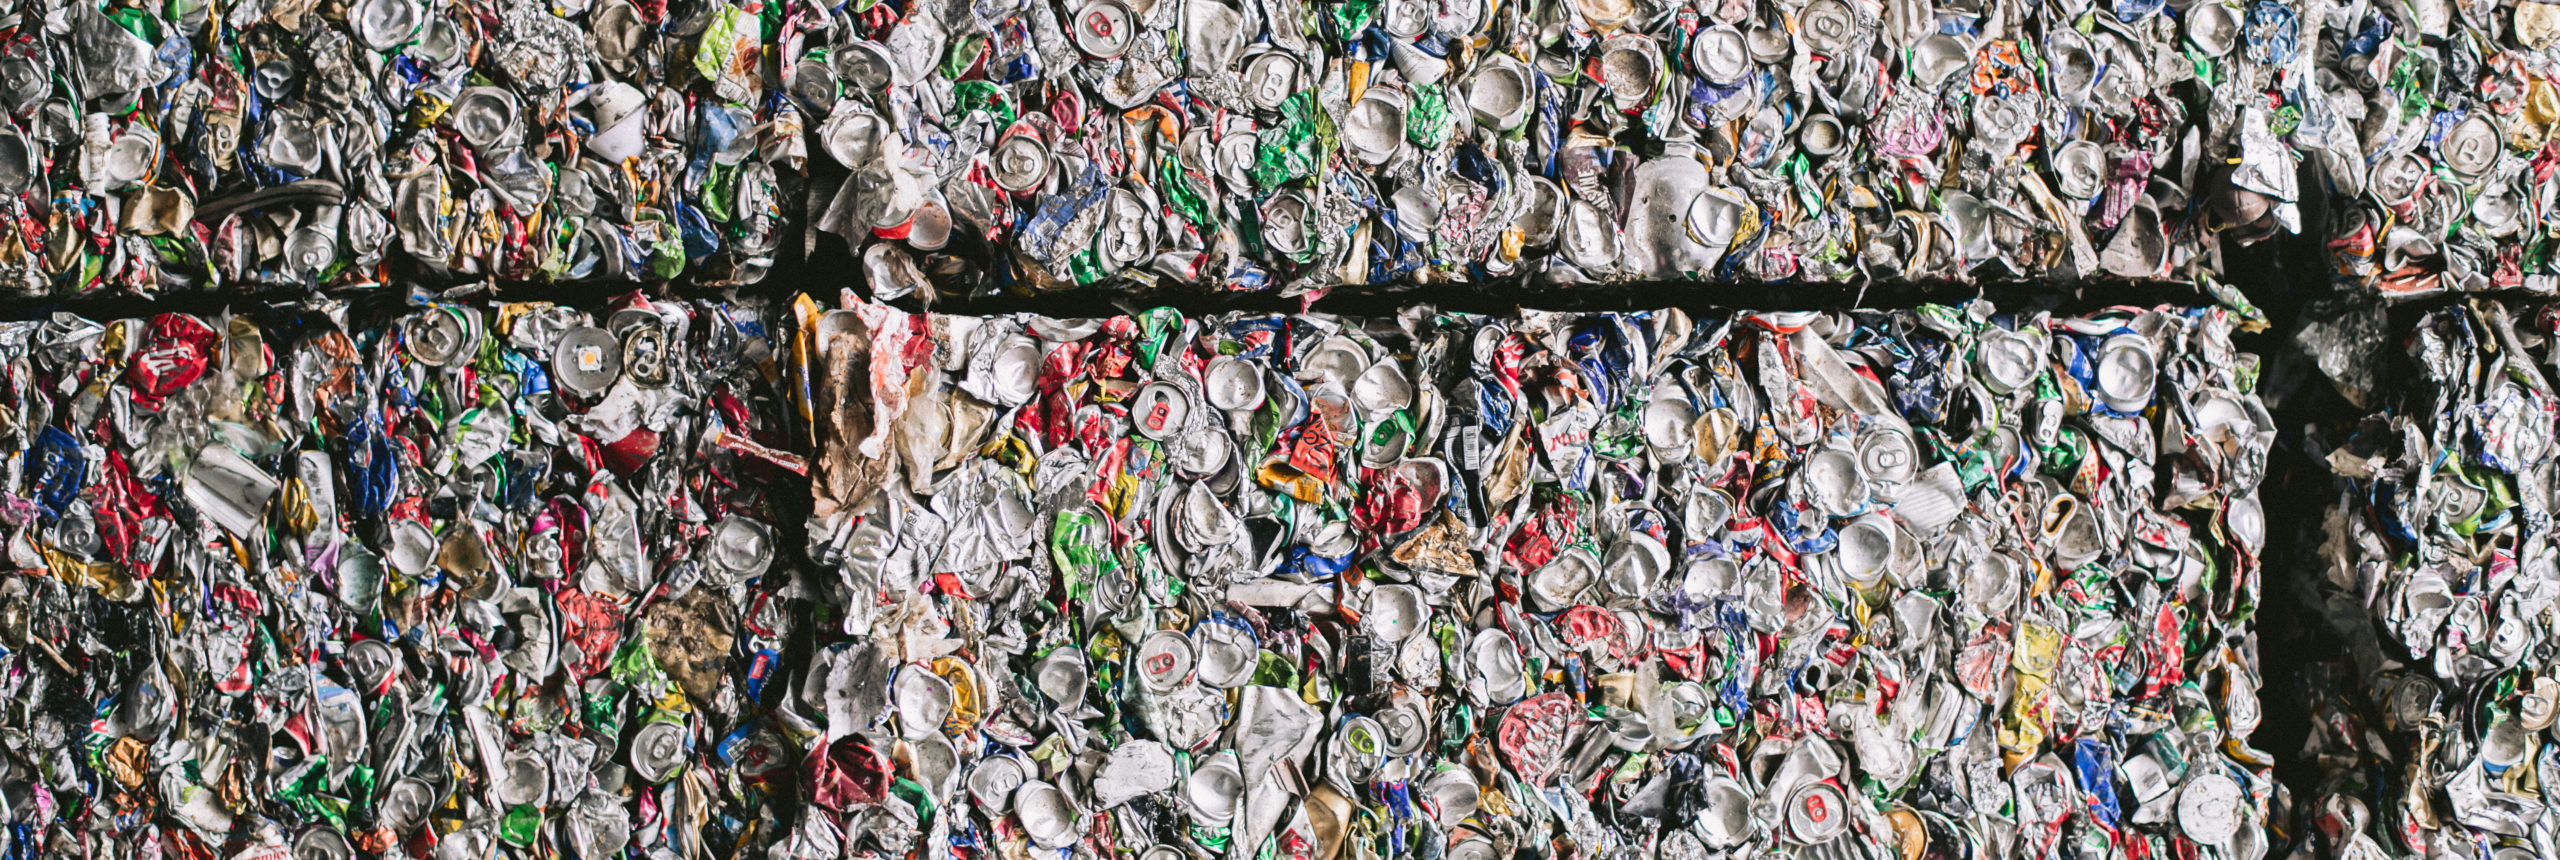 Aluminum cans baled for recycling